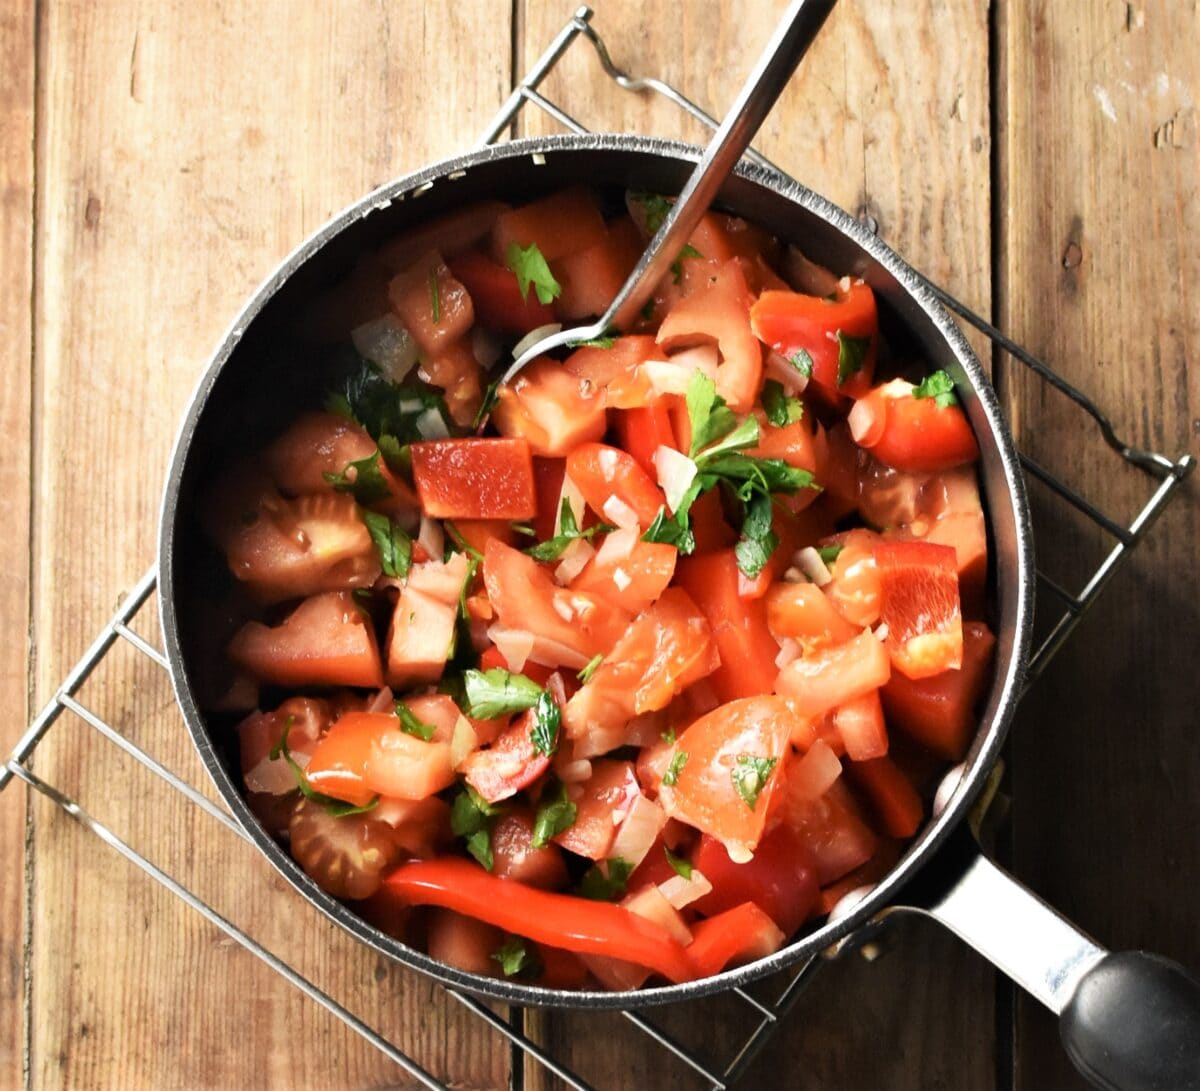 Chopped tomatoes, peppers and herbs in pot with spoon.